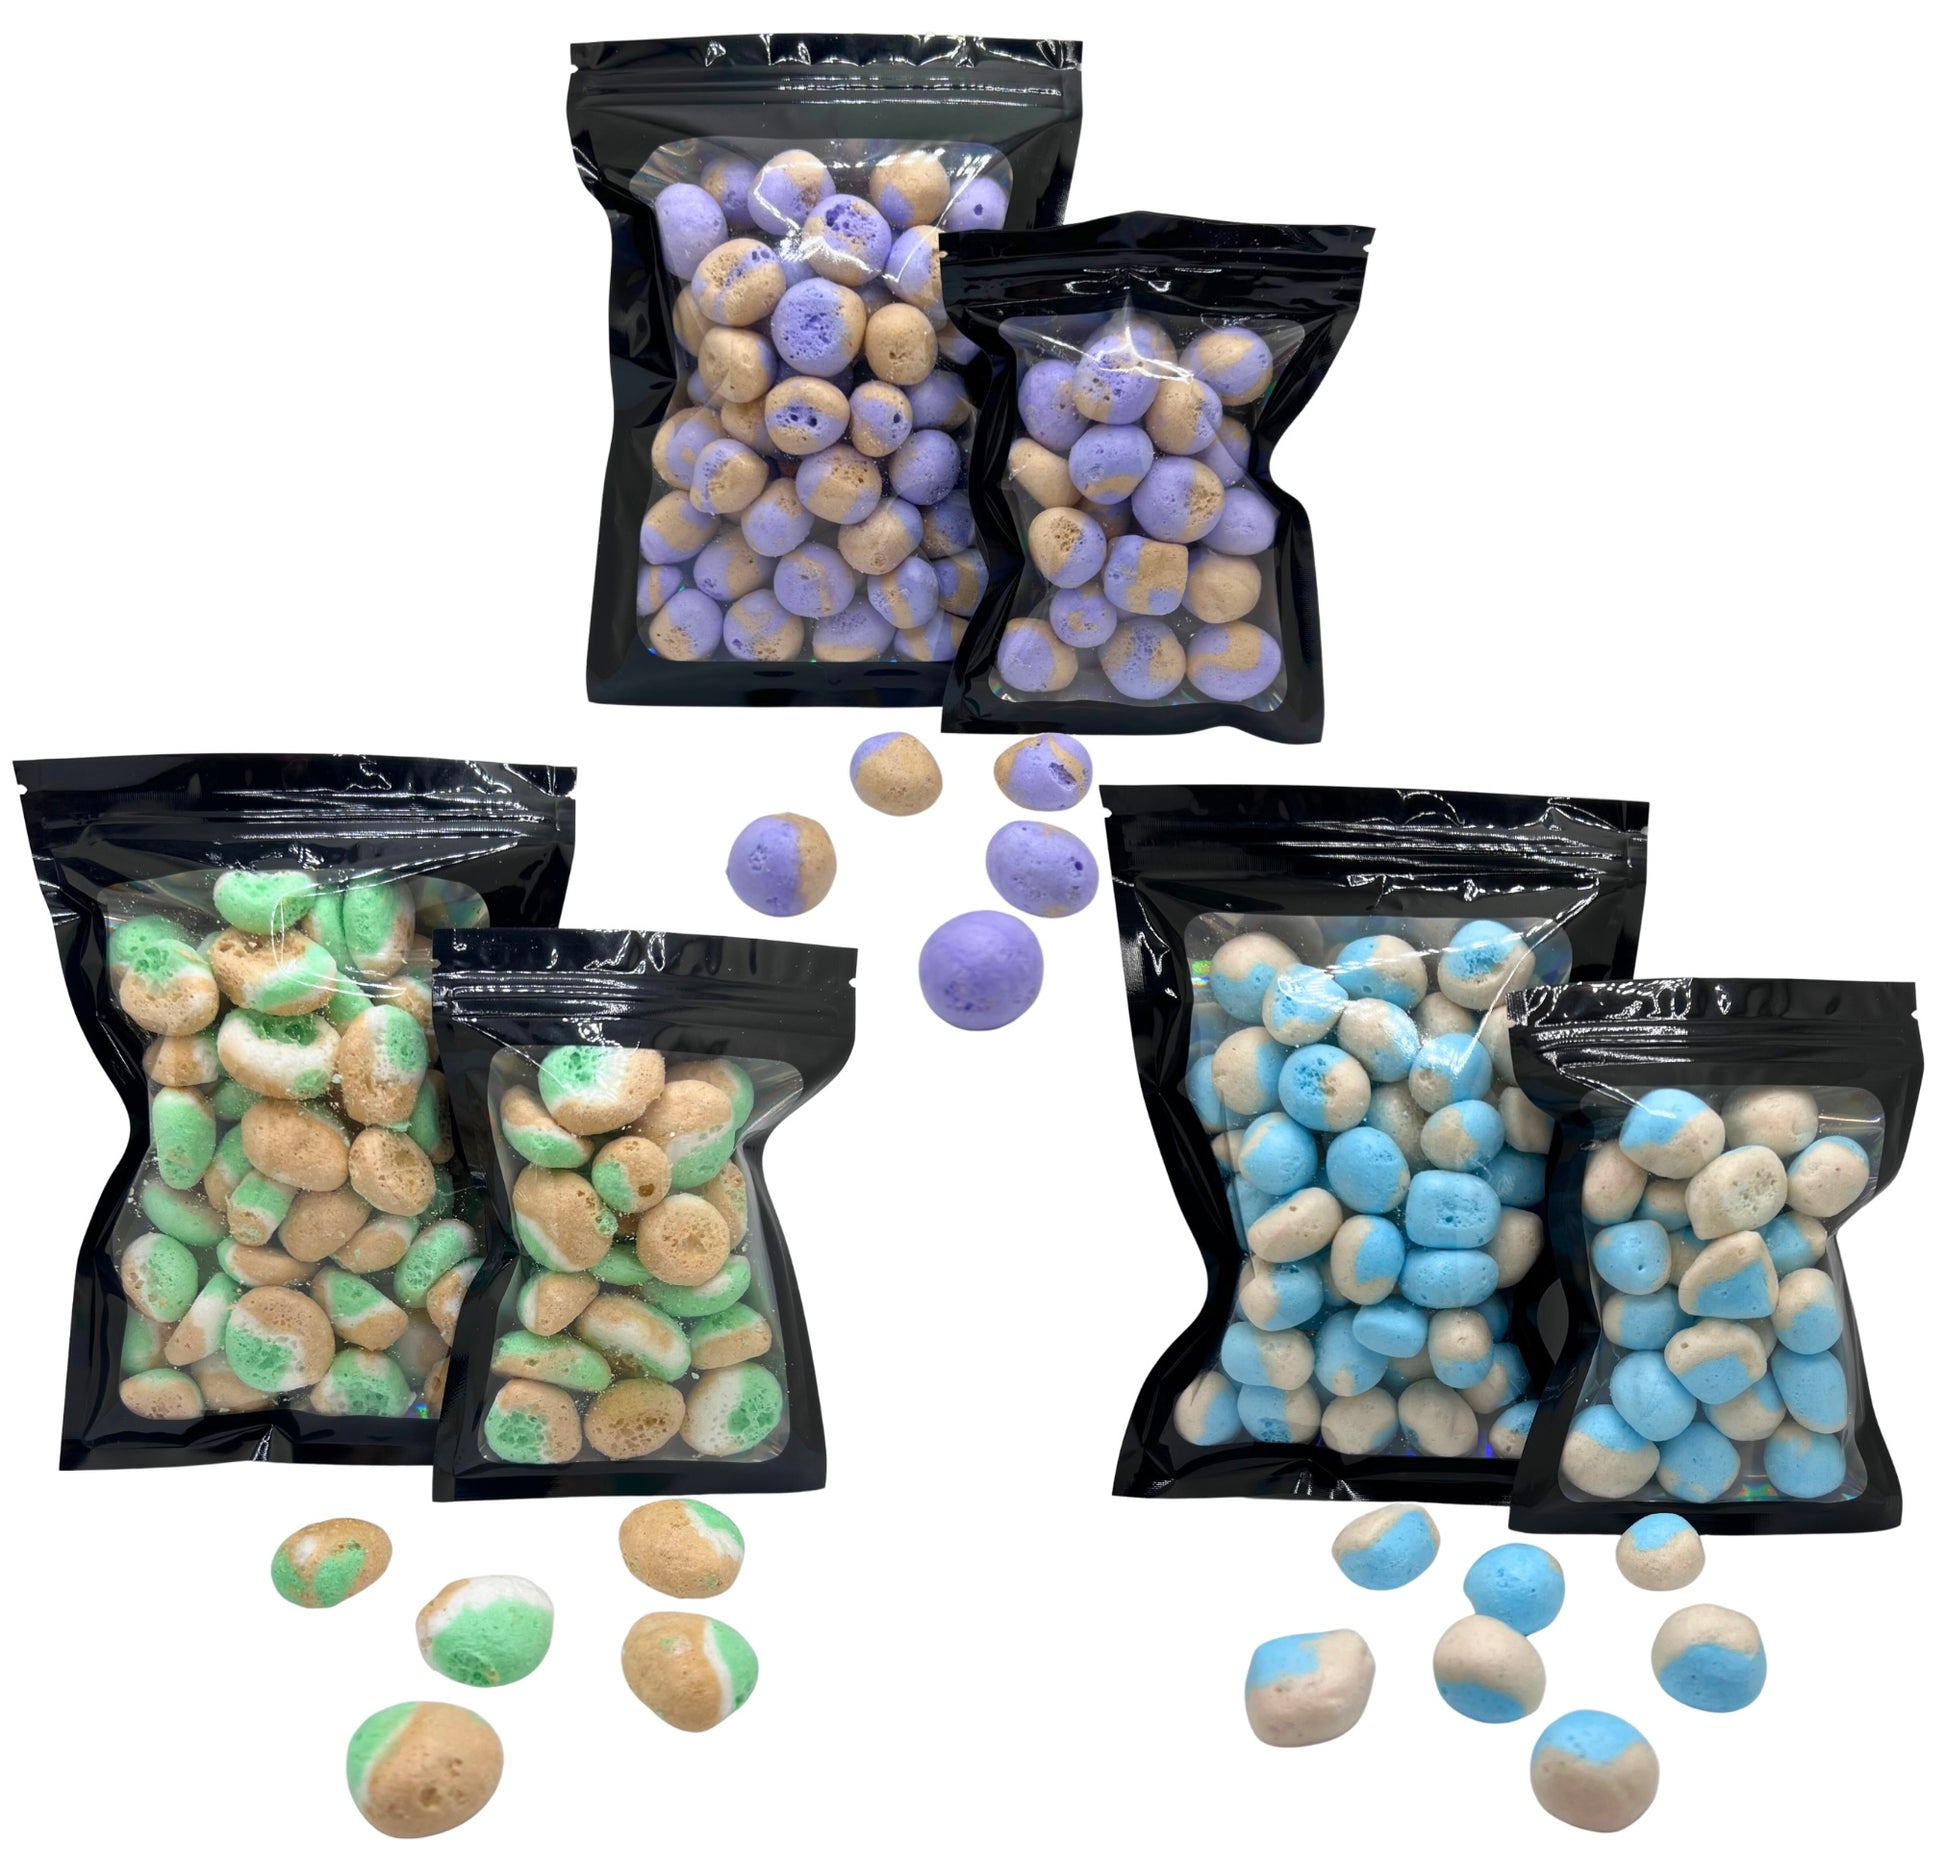 Freeze dried taffy candy trio pack. SWEET, BUTTERY APPLE PIE, BLACK BERRY CRUMBLE, AND FRESH-BAKED SUGAR COOKIES CRUNCHY FREEZE DRIED CANDY TAFFY.  